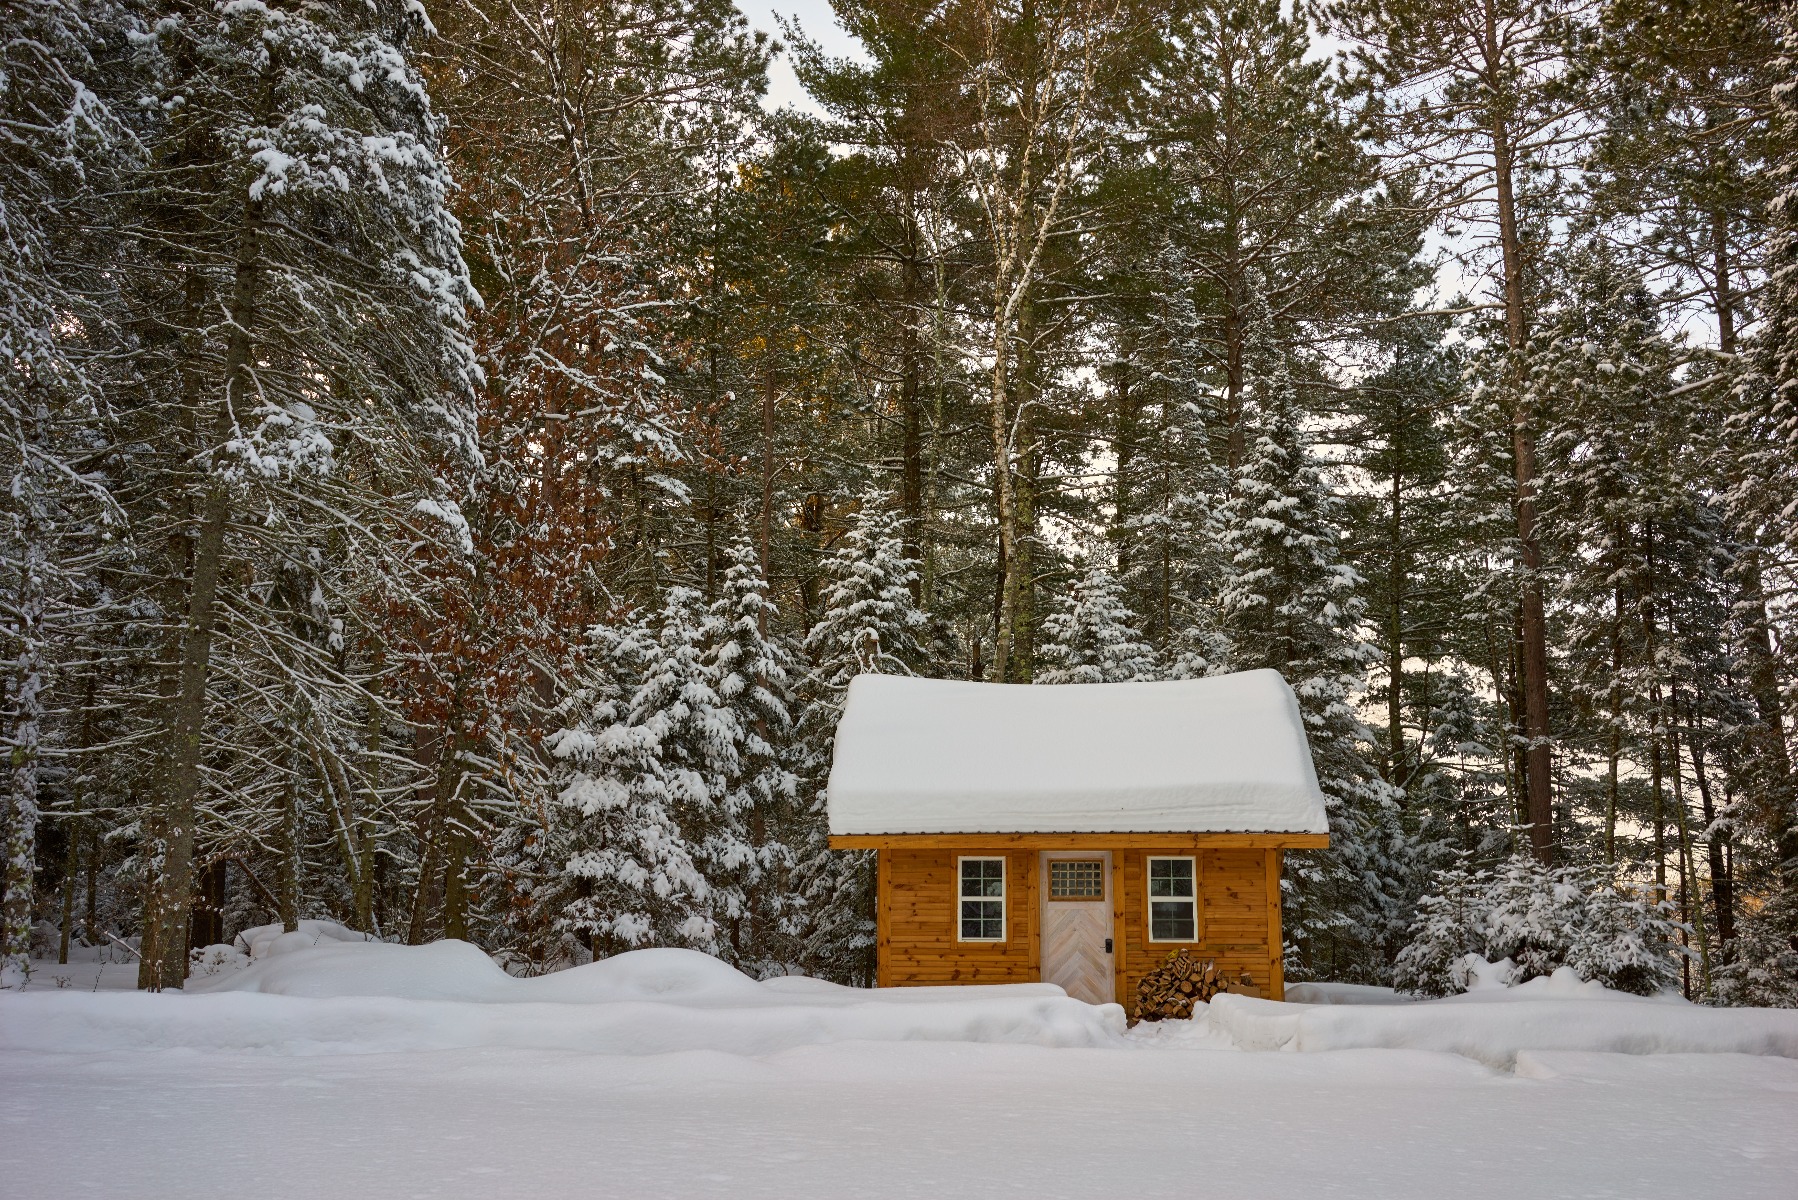 Can I use my log cabin all year round?